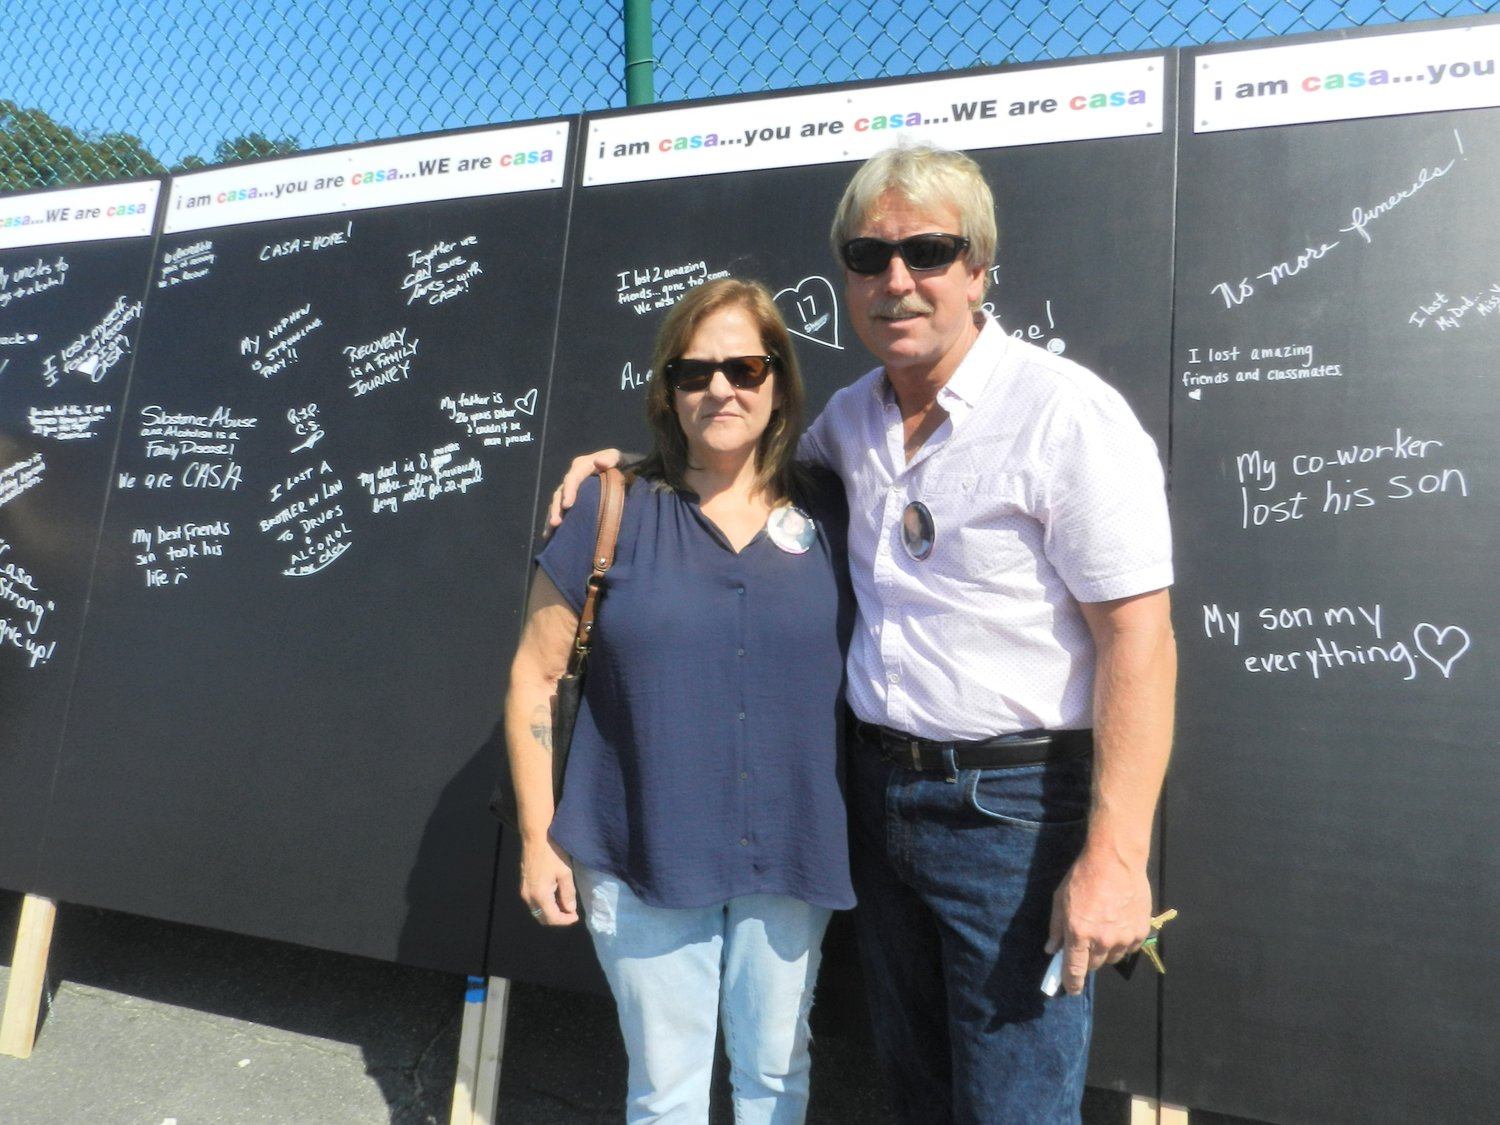 Glen Head residents Lisa and John Brala attended the Day of Wellness in honor of their son, Shaun, who died in 2012 after battling substance abuse disorder.